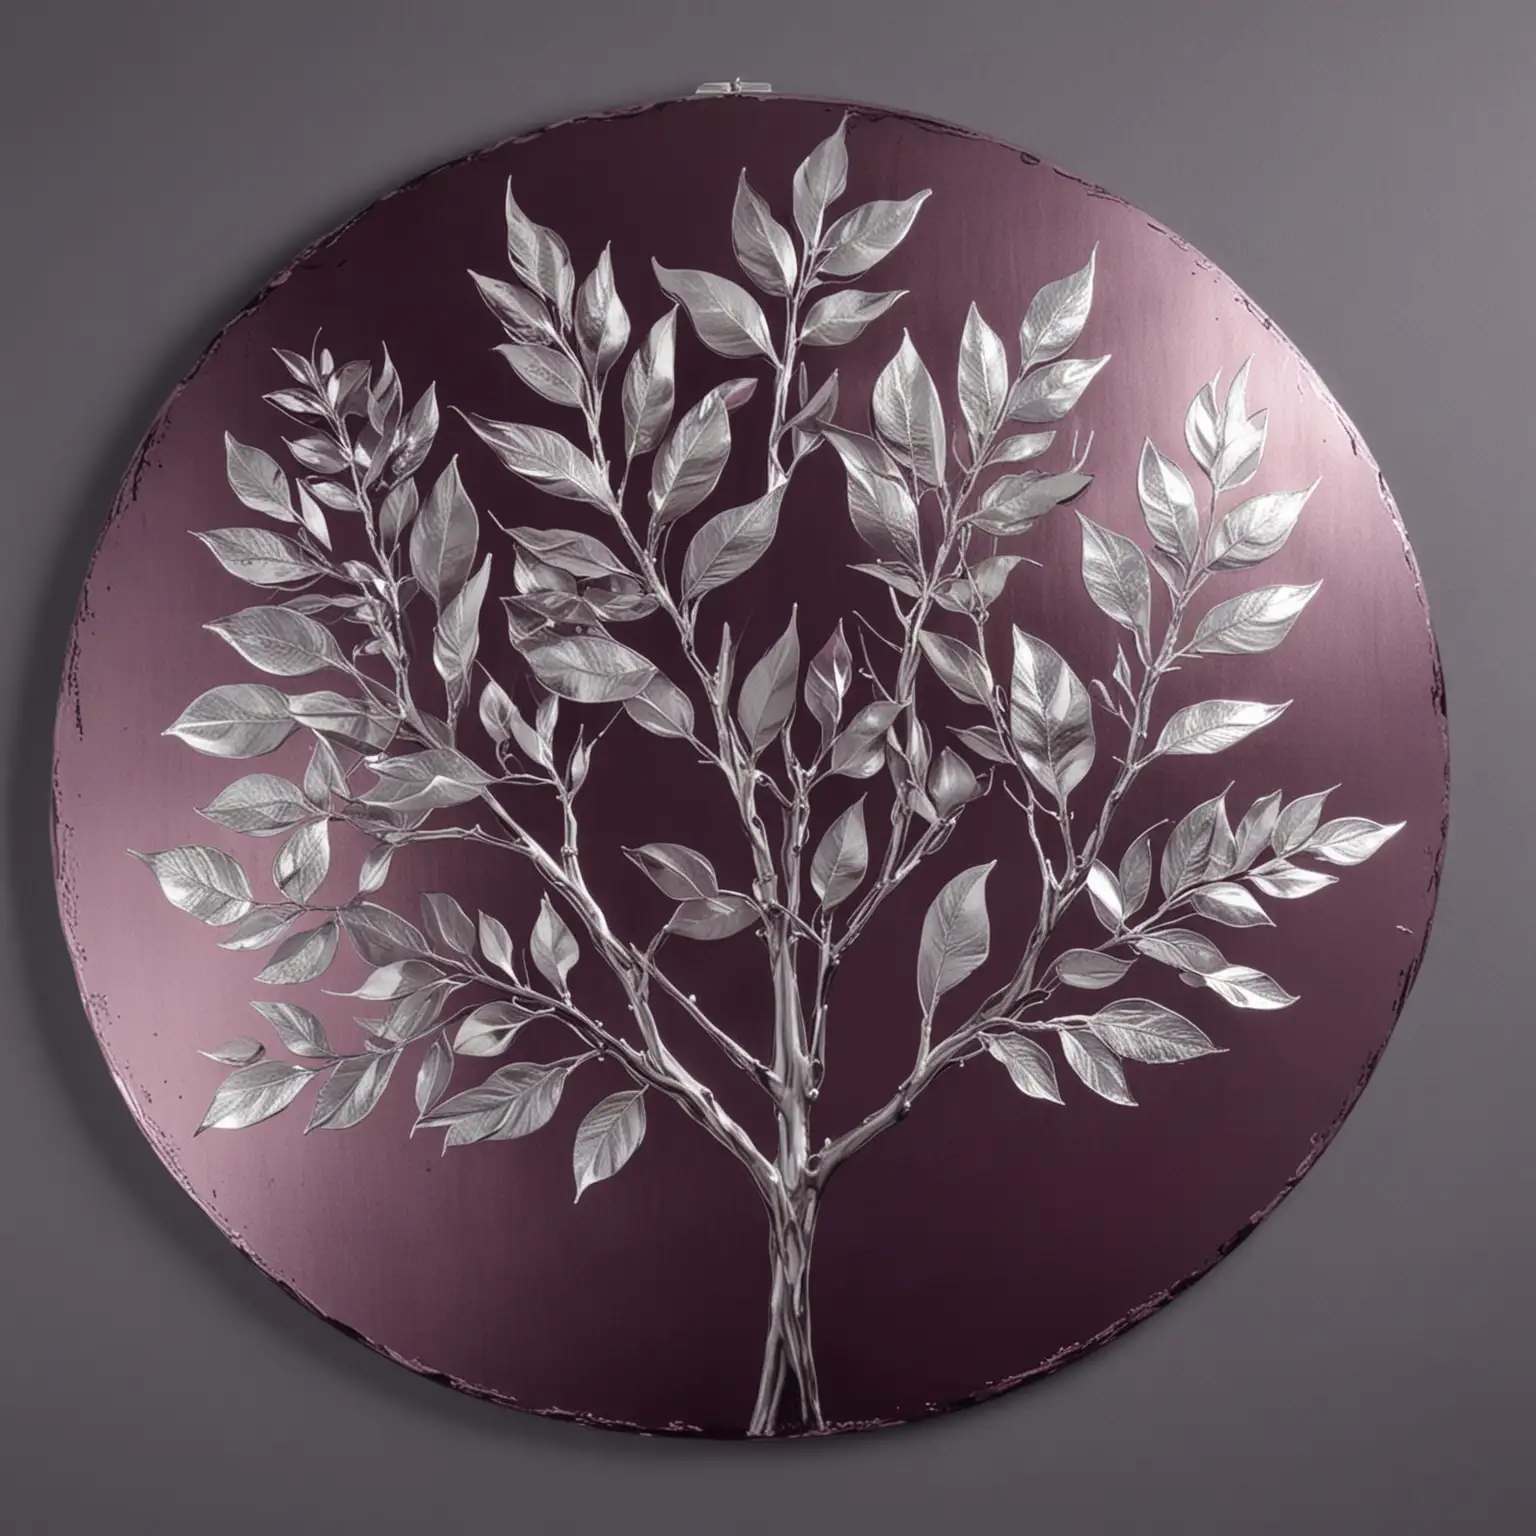 Three Bright Silver Leaves on Dark Purple and Mauve Background